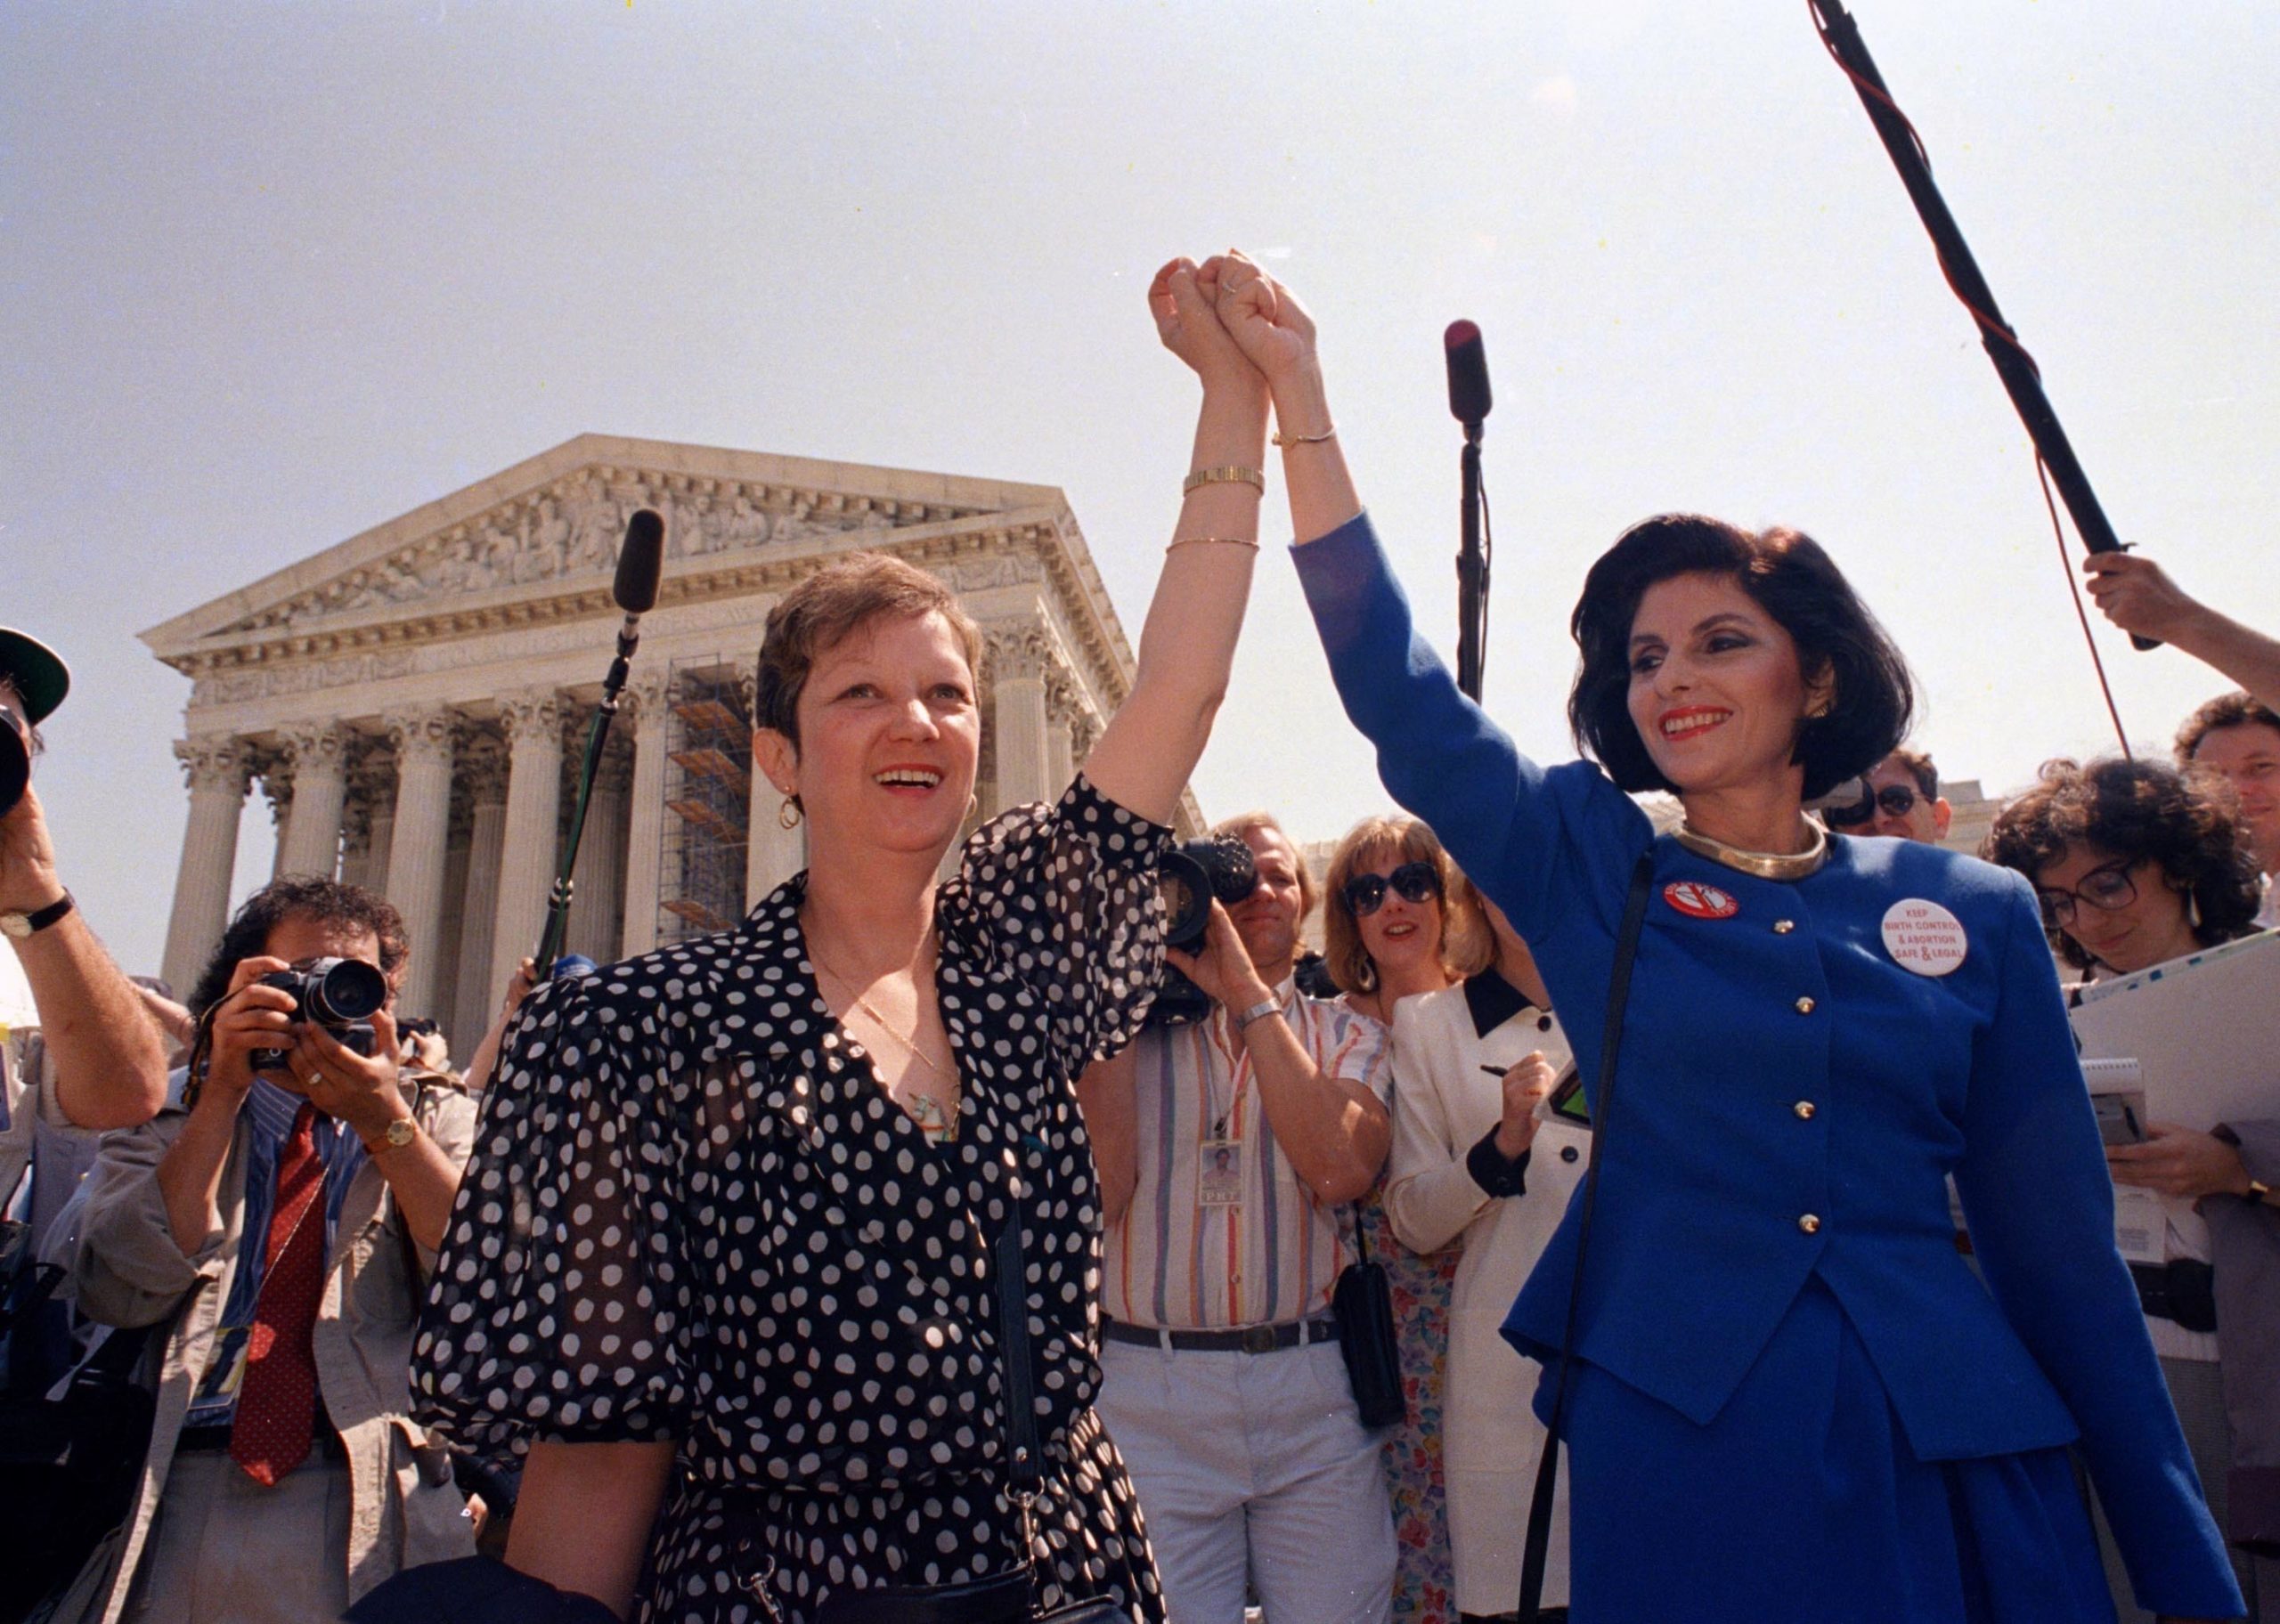 Norma McCorvey, better known as Jane Roe in the 1973 court case Roe v. Wade, left, and her attorney Gloria Allred hold hands as they leave the Supreme Court building in 1989. In "The Family Roe," Joshua Prager shines a new light on McCorvey's life and legacy